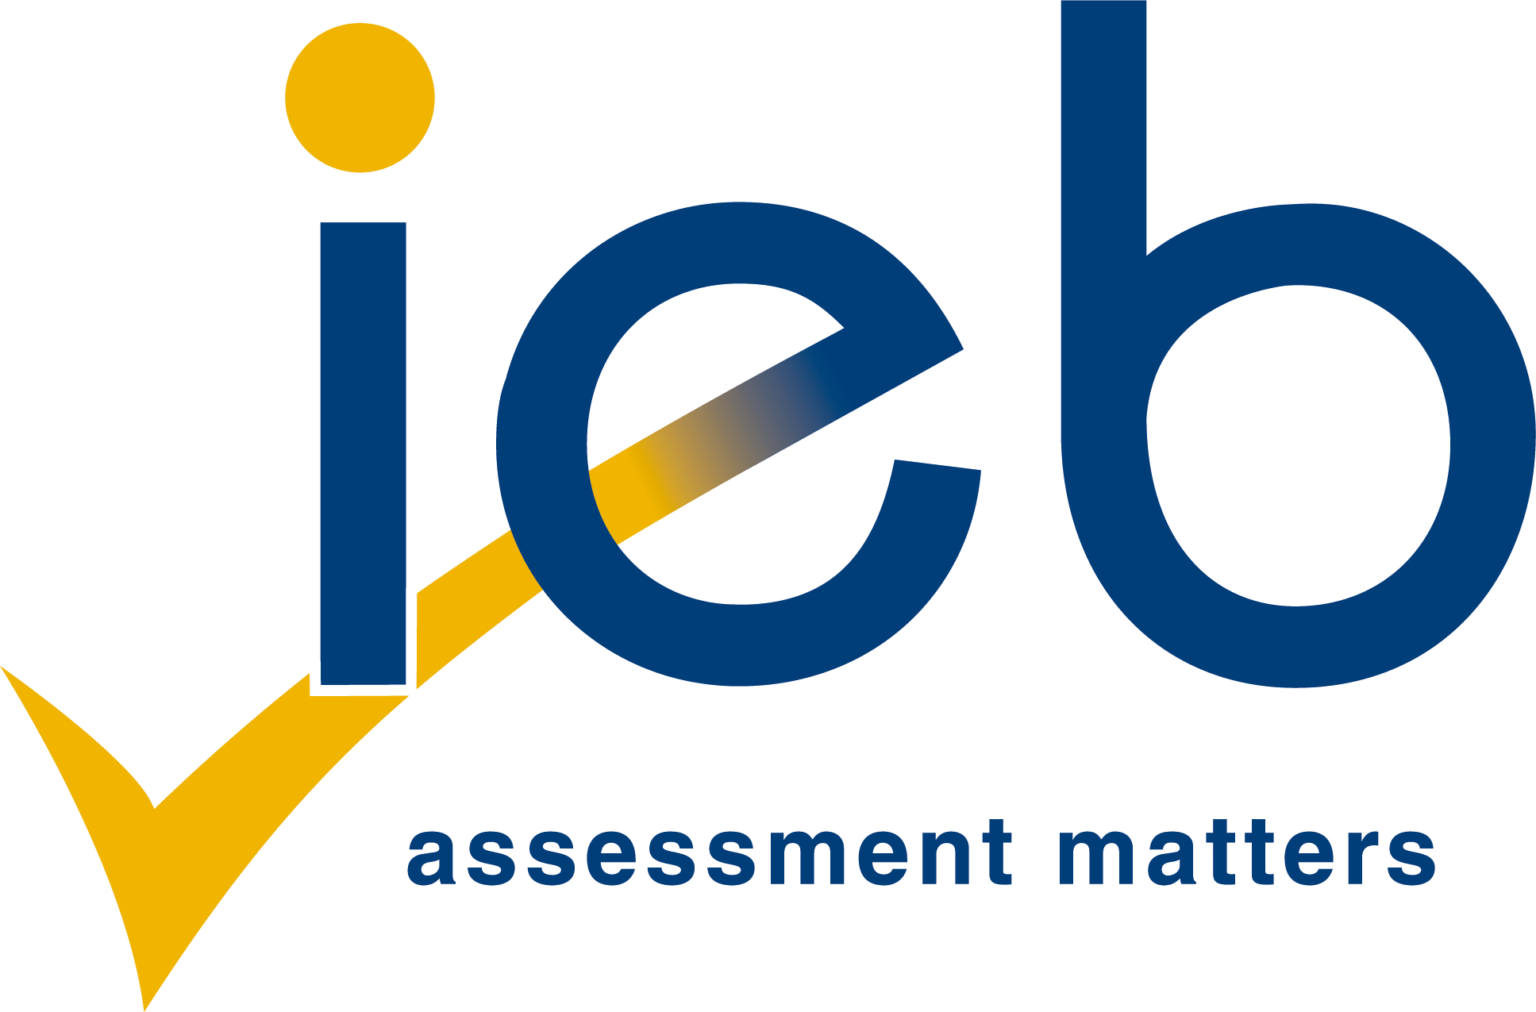 IEB Results 2021/2022 Check Here On January